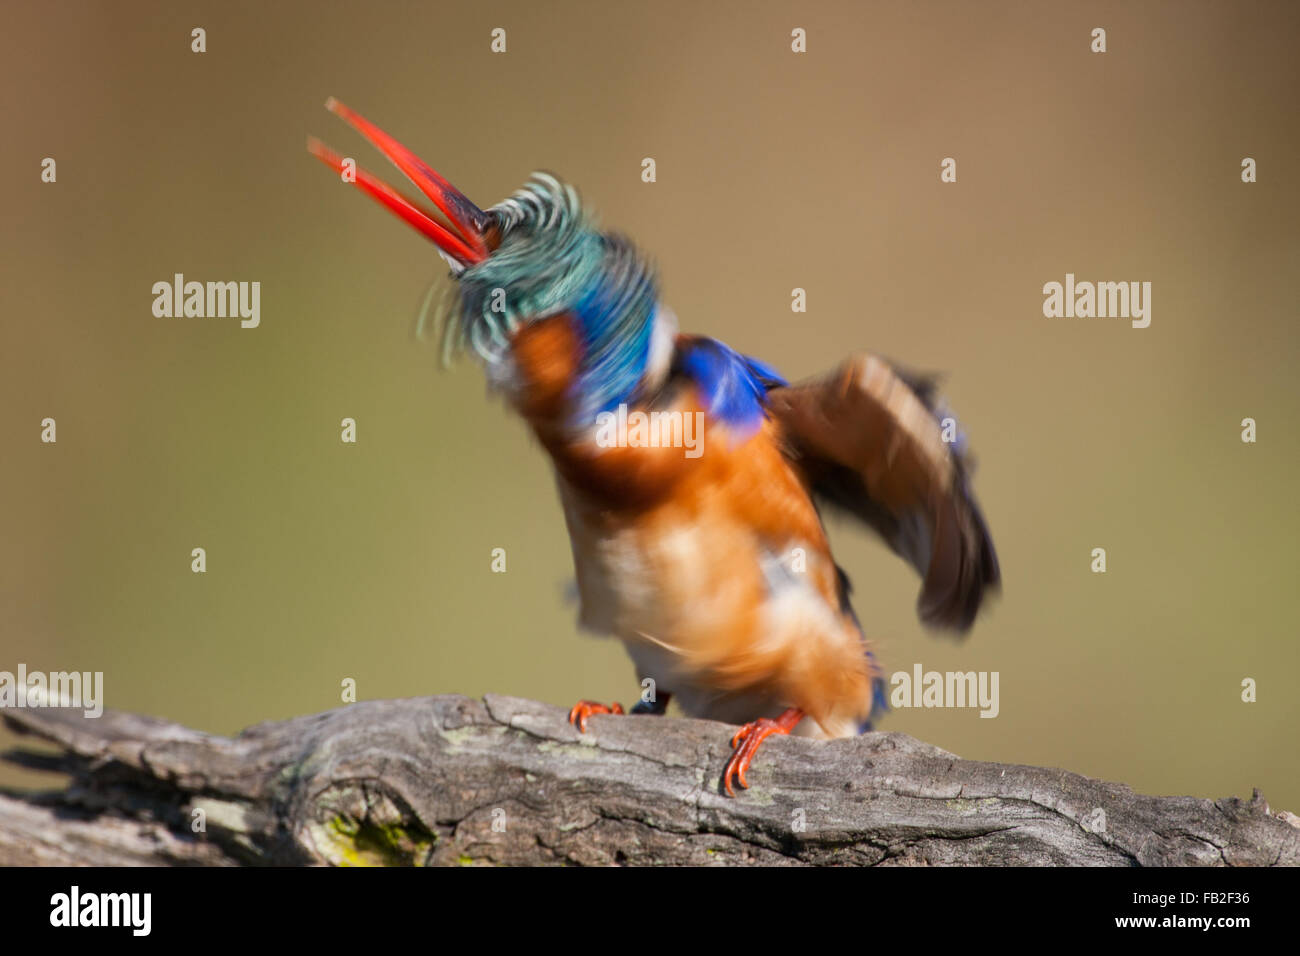 Malachite Kingfisher shaking its head after diving into the water to catch fish. Having a bad hair day. Stock Photo